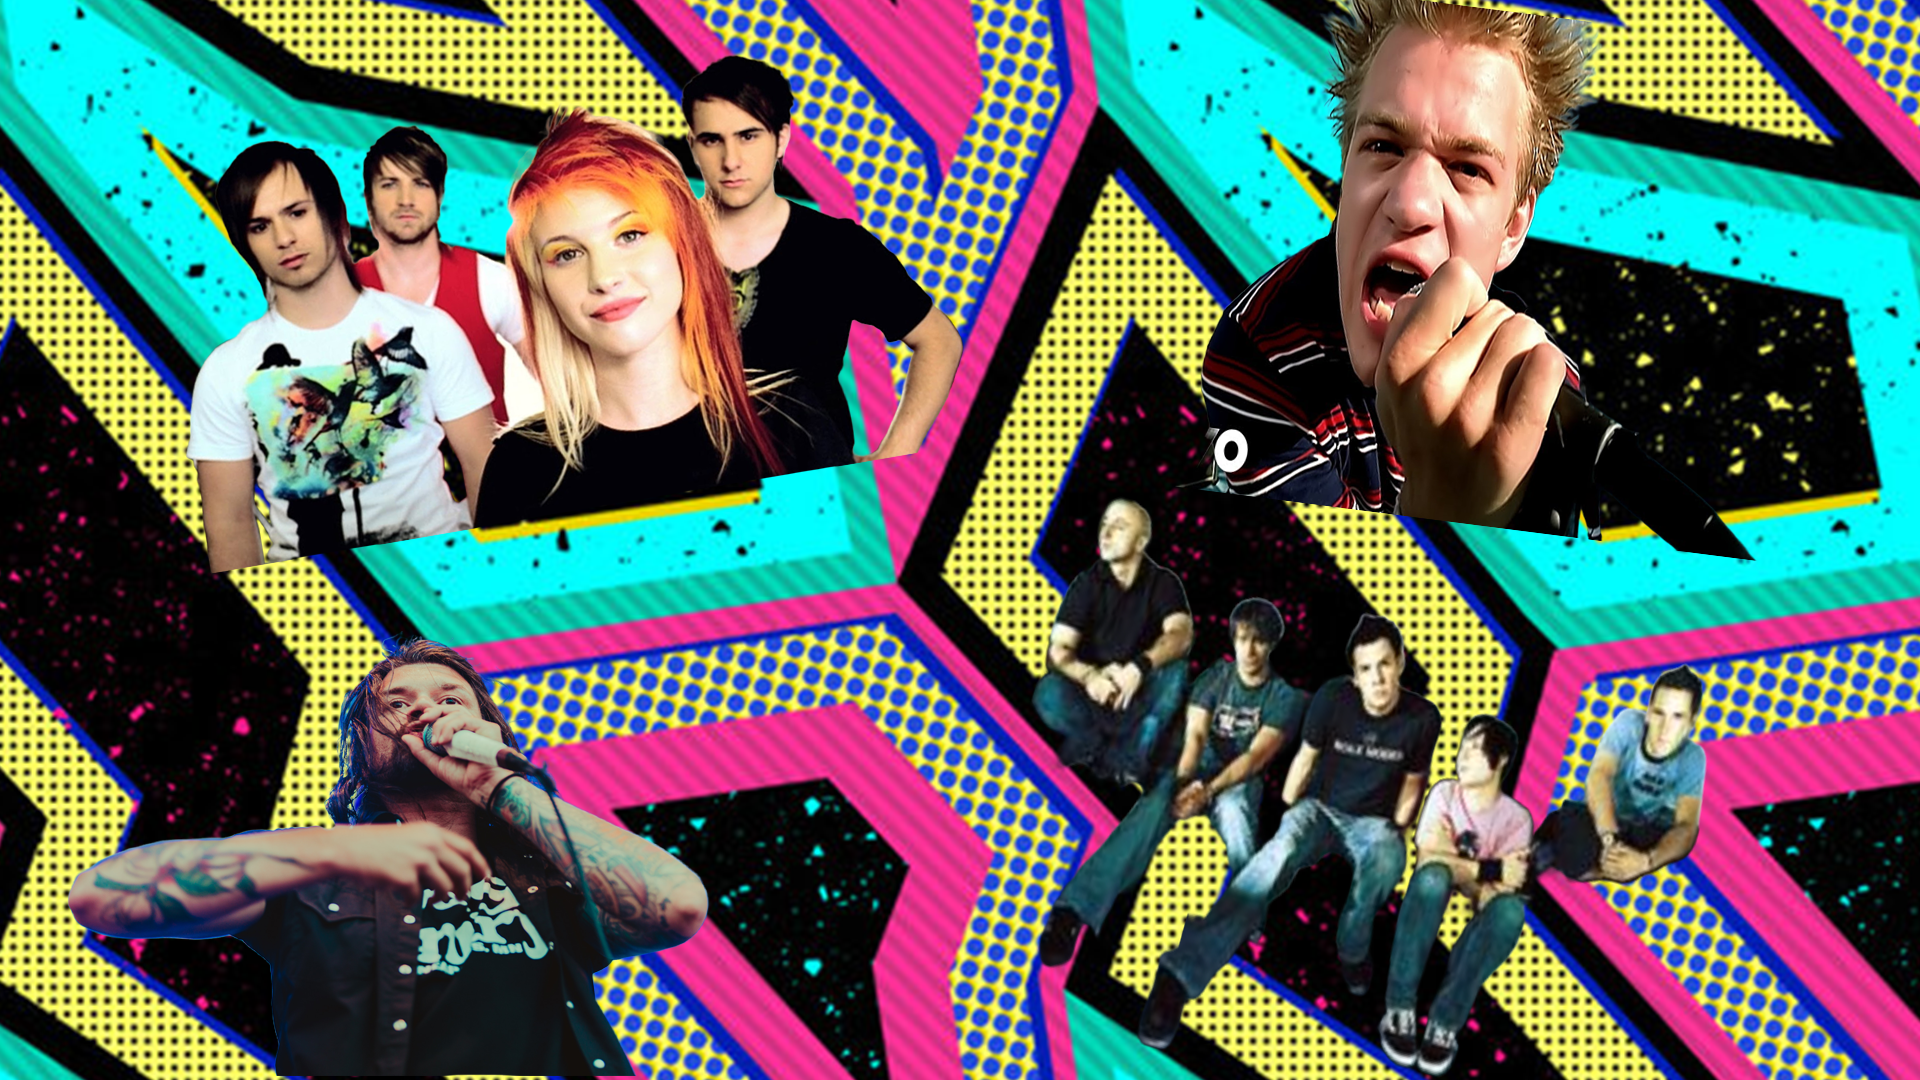 Can You Guess the 2000s Pop-Punk Song From One Lyric?